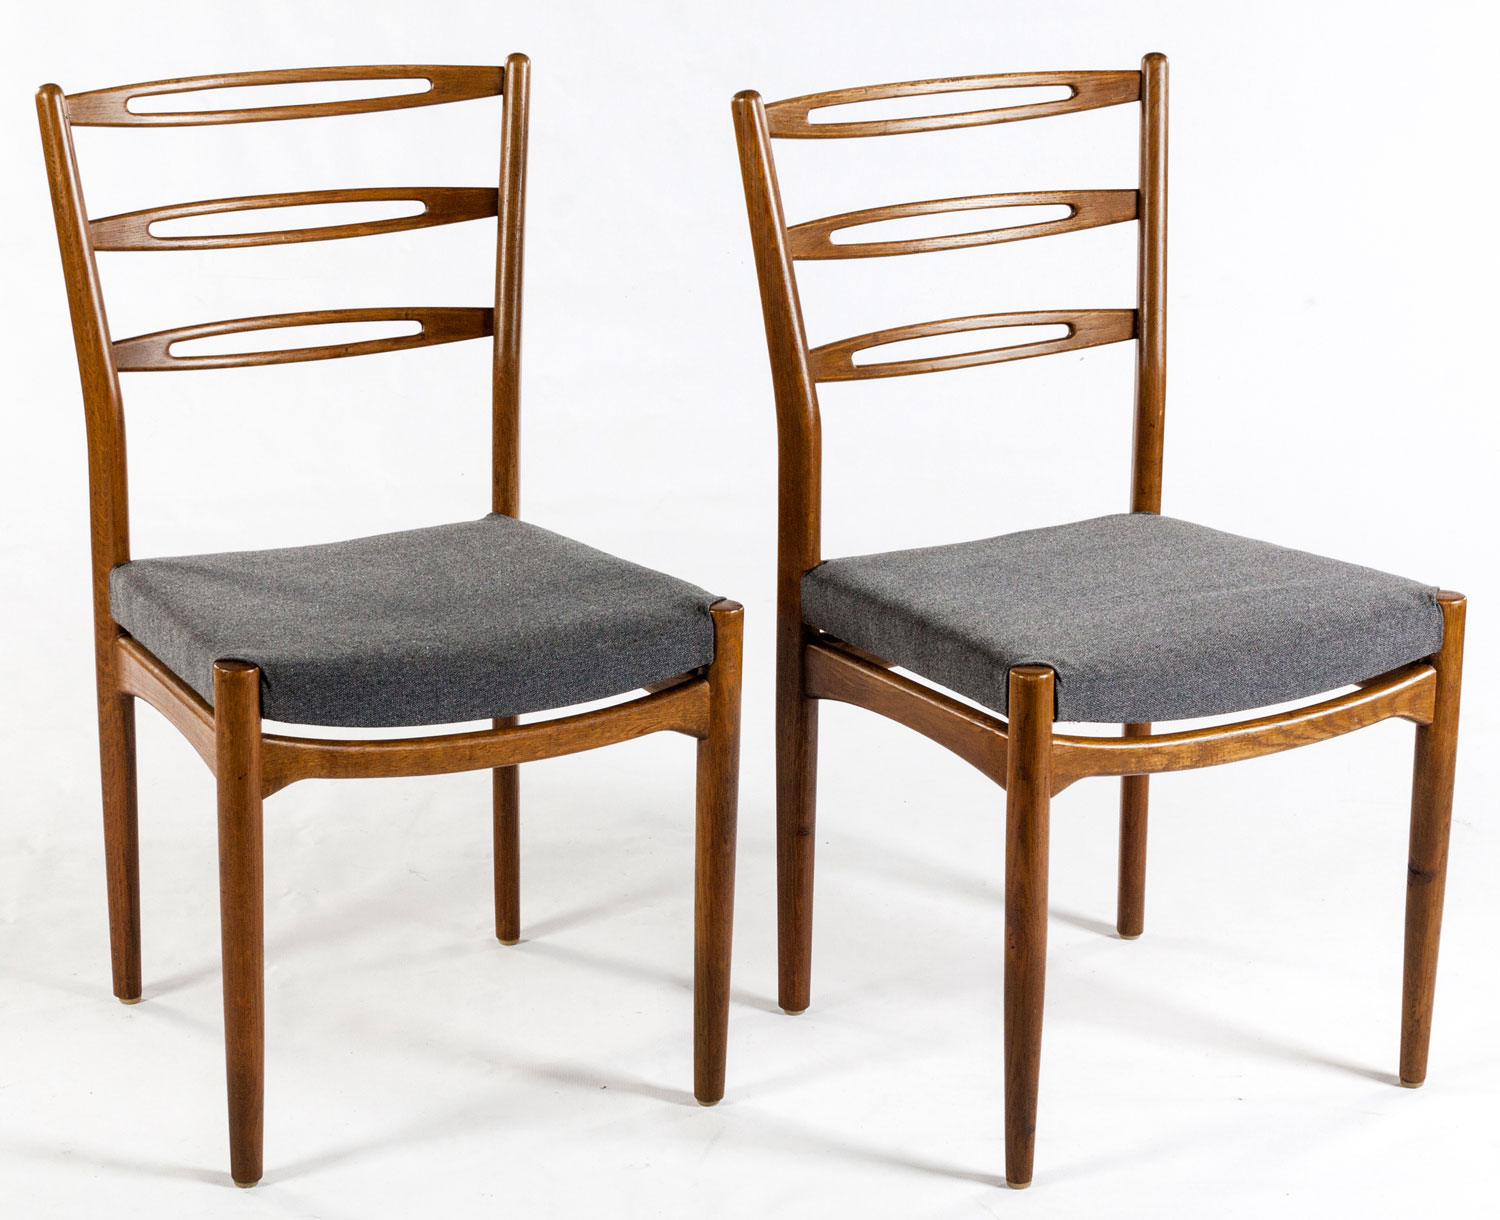 A PAIR OF DANISH OAK SIDE CHAIRS